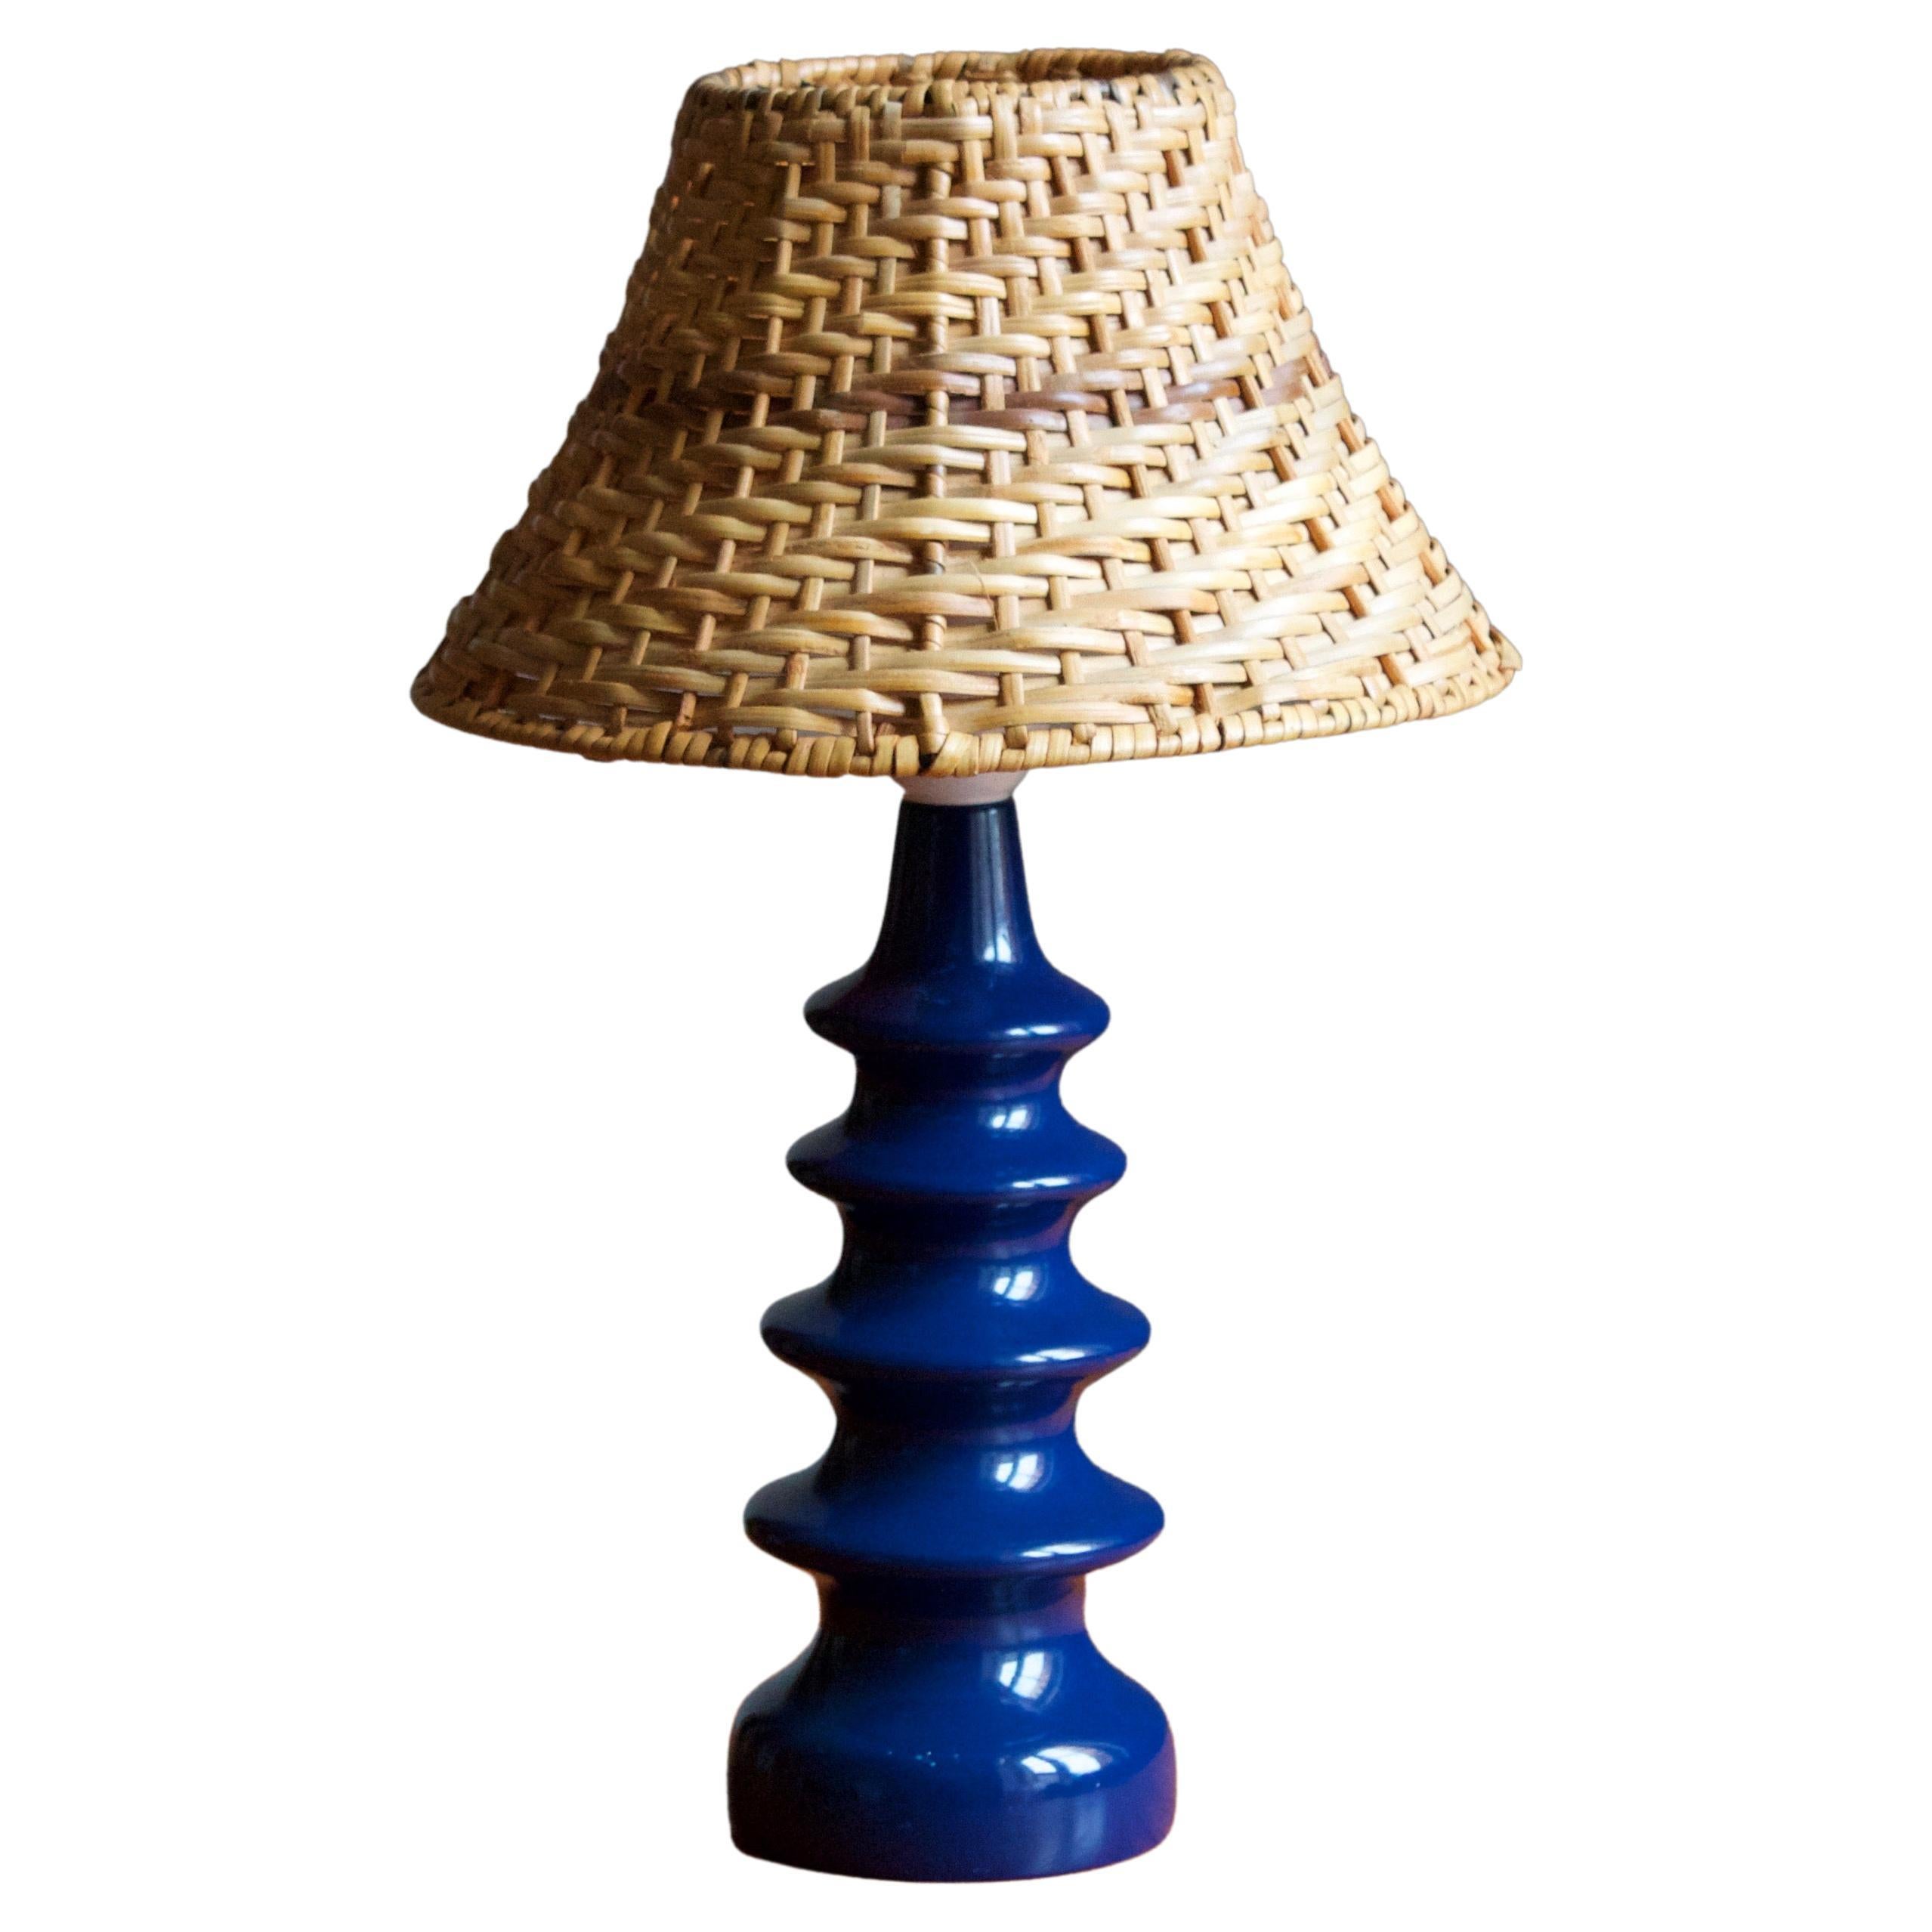 Swedish, Organic Table Lamp, Blue-Lacquered Wood, Rattan, Sweden, 1970s